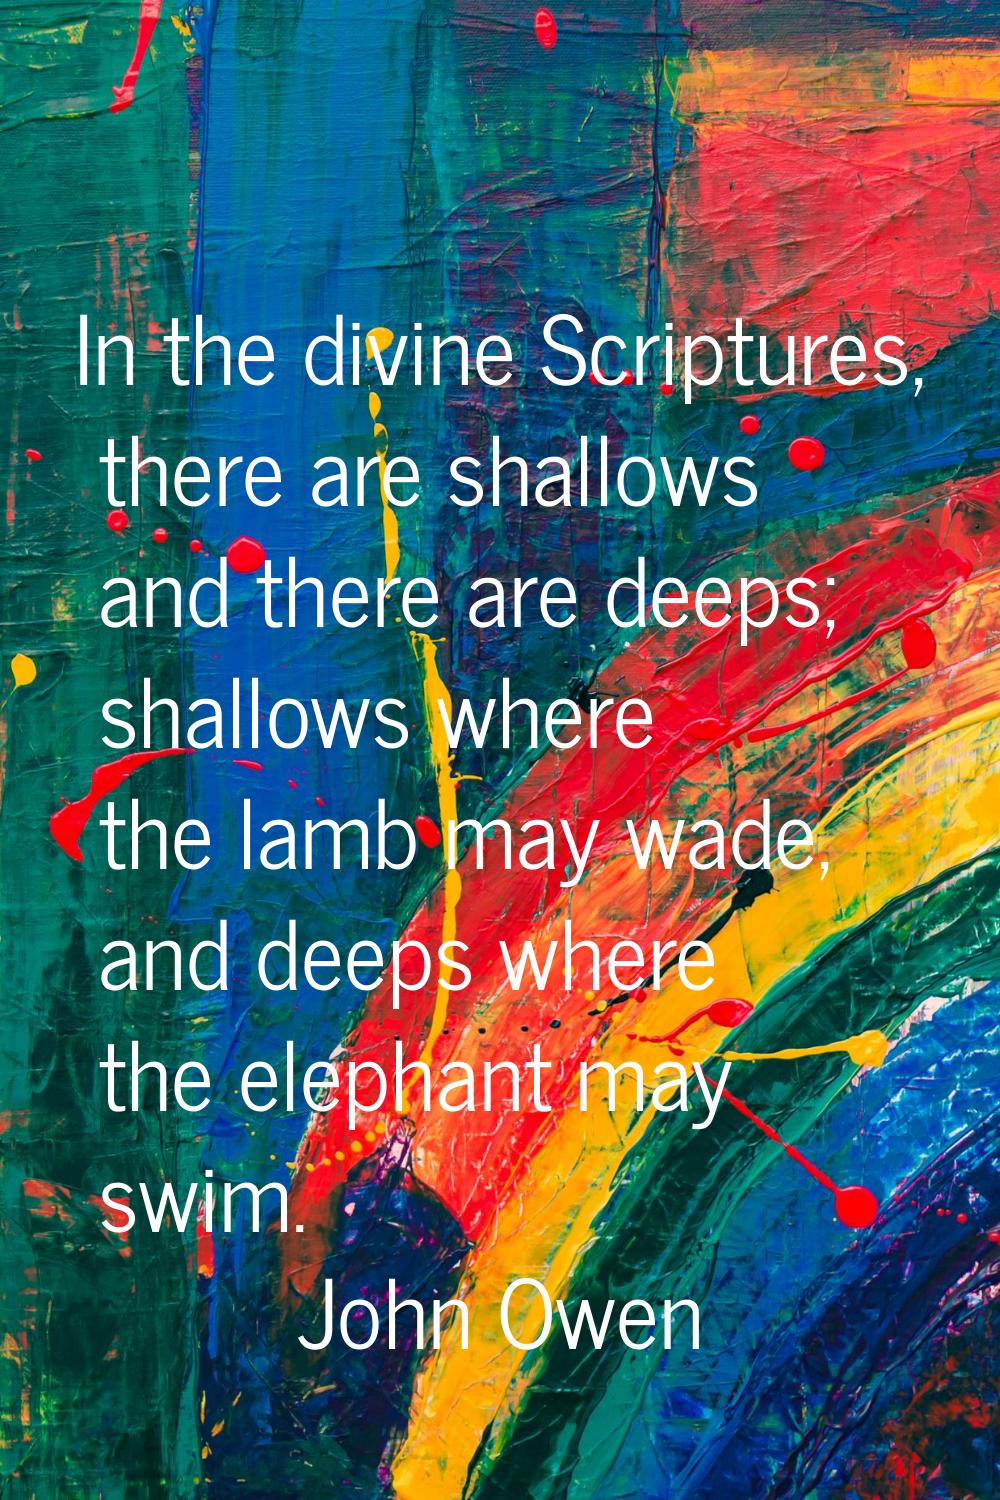 In the divine Scriptures, there are shallows and there are deeps; shallows where the lamb may wade,